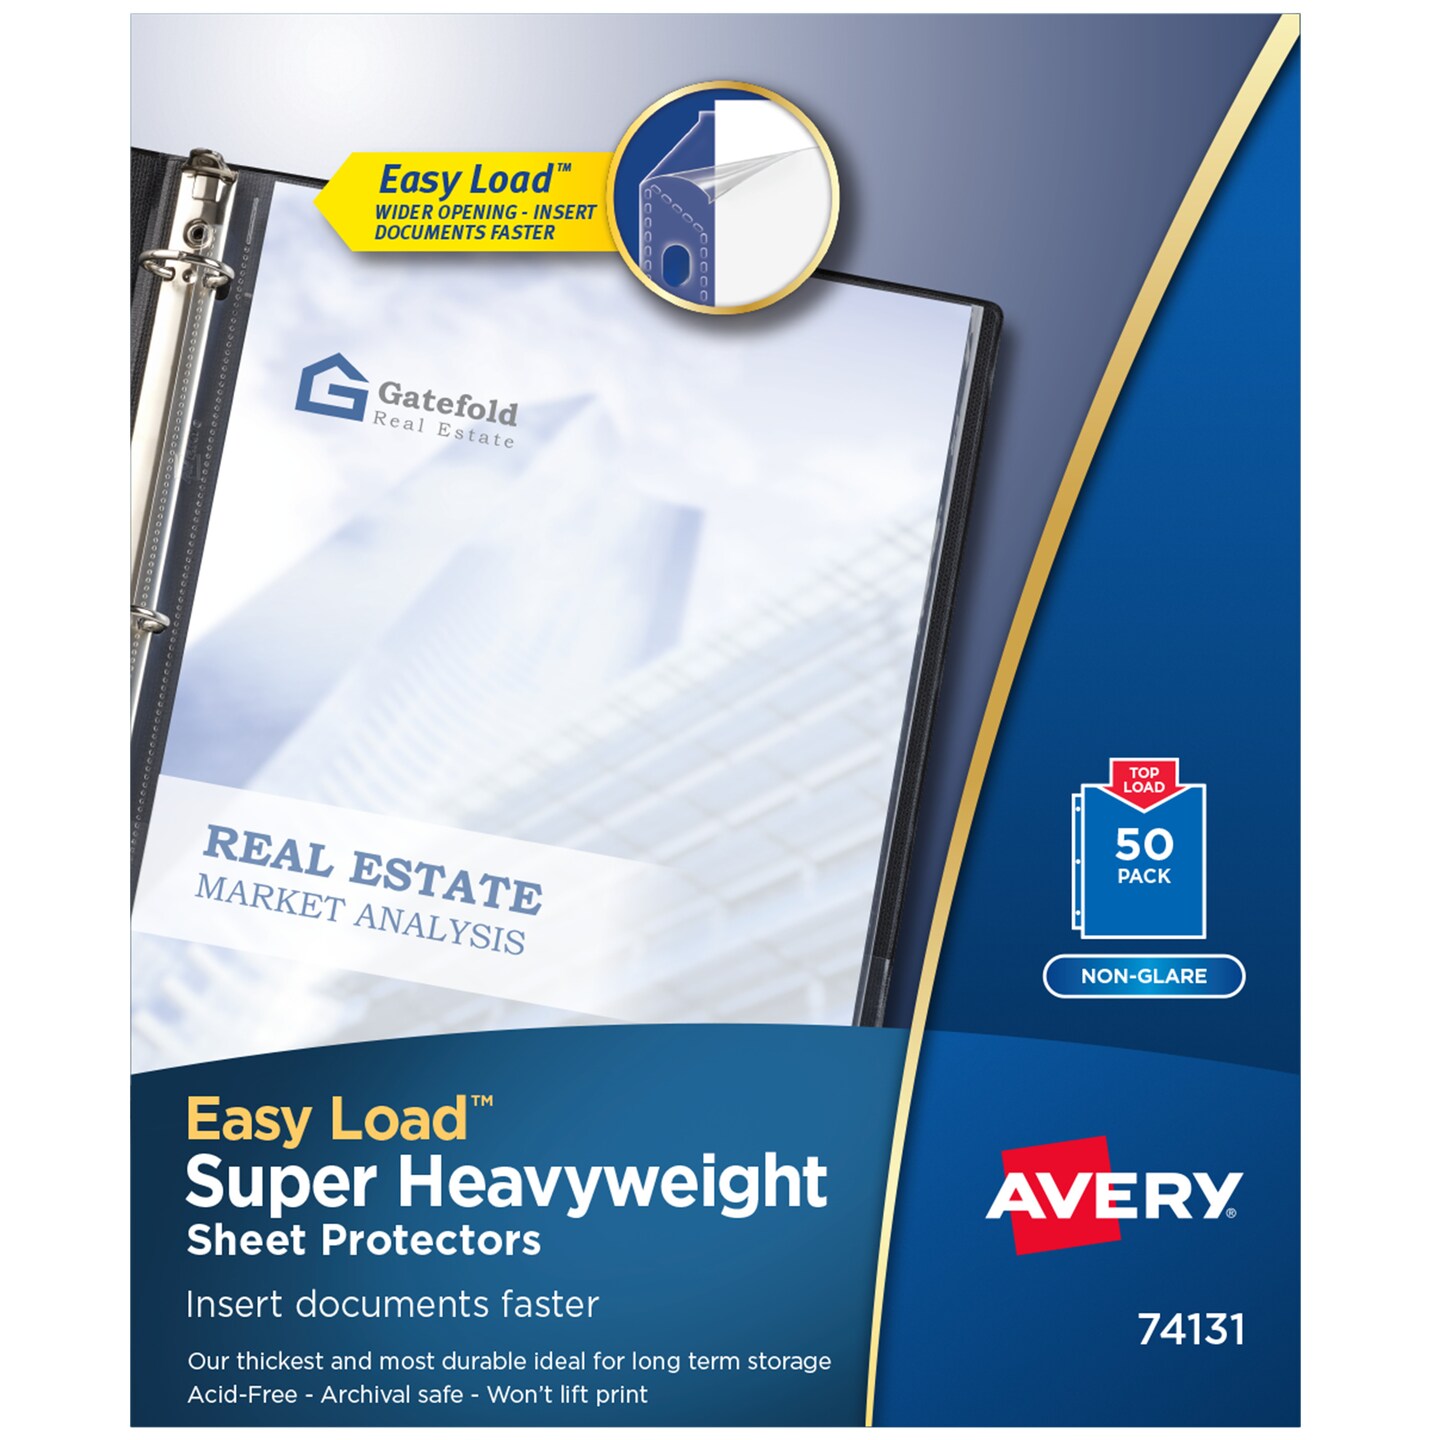 Avery Clear Photo Album Pages for 3 Ring Binders, 10 Sleeves Holds 40 Total  Horizontal 4 x 6 Photos, 3 Packs, 30 Sleeves Total (13406)